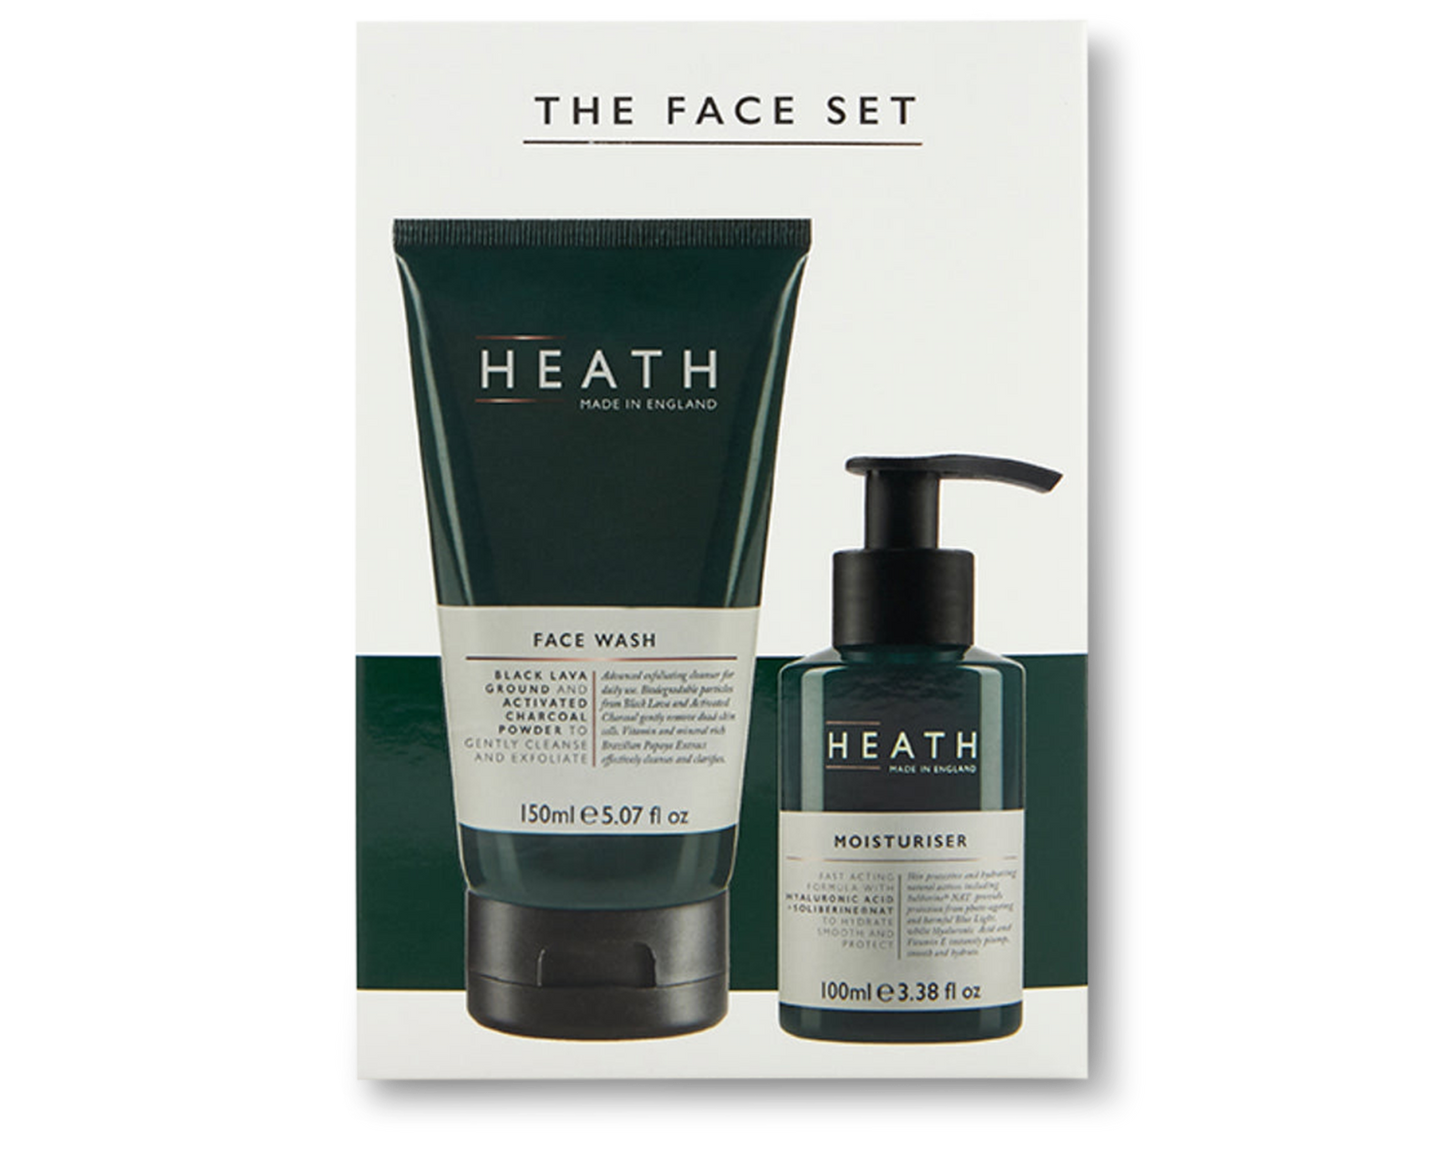 The Face Set